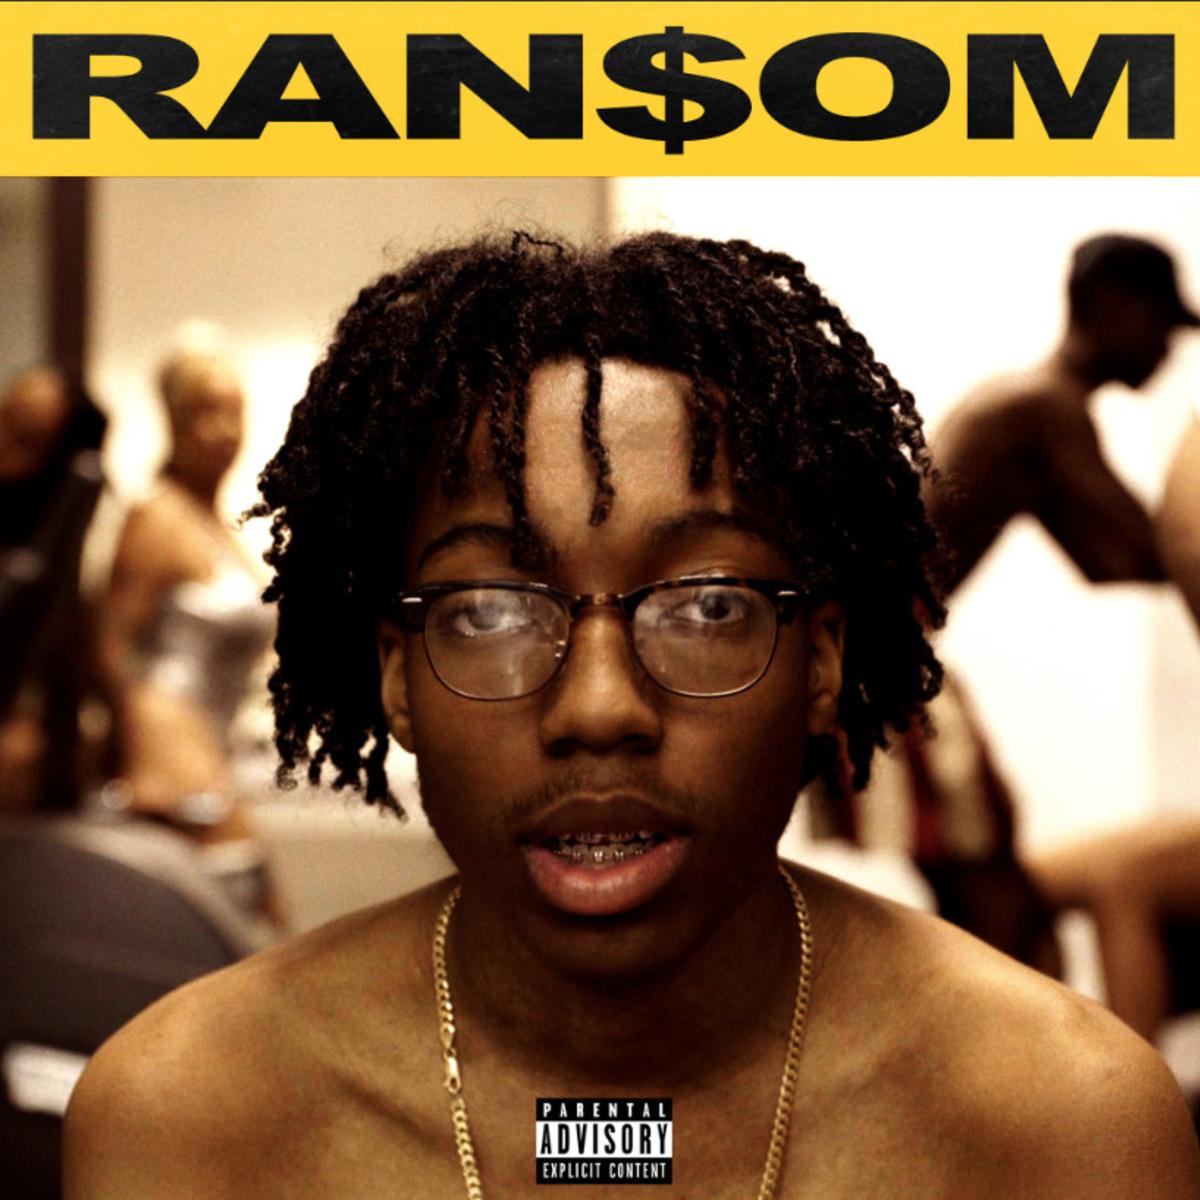 Lil Tecca Makes A Bold Introduction With Ransom